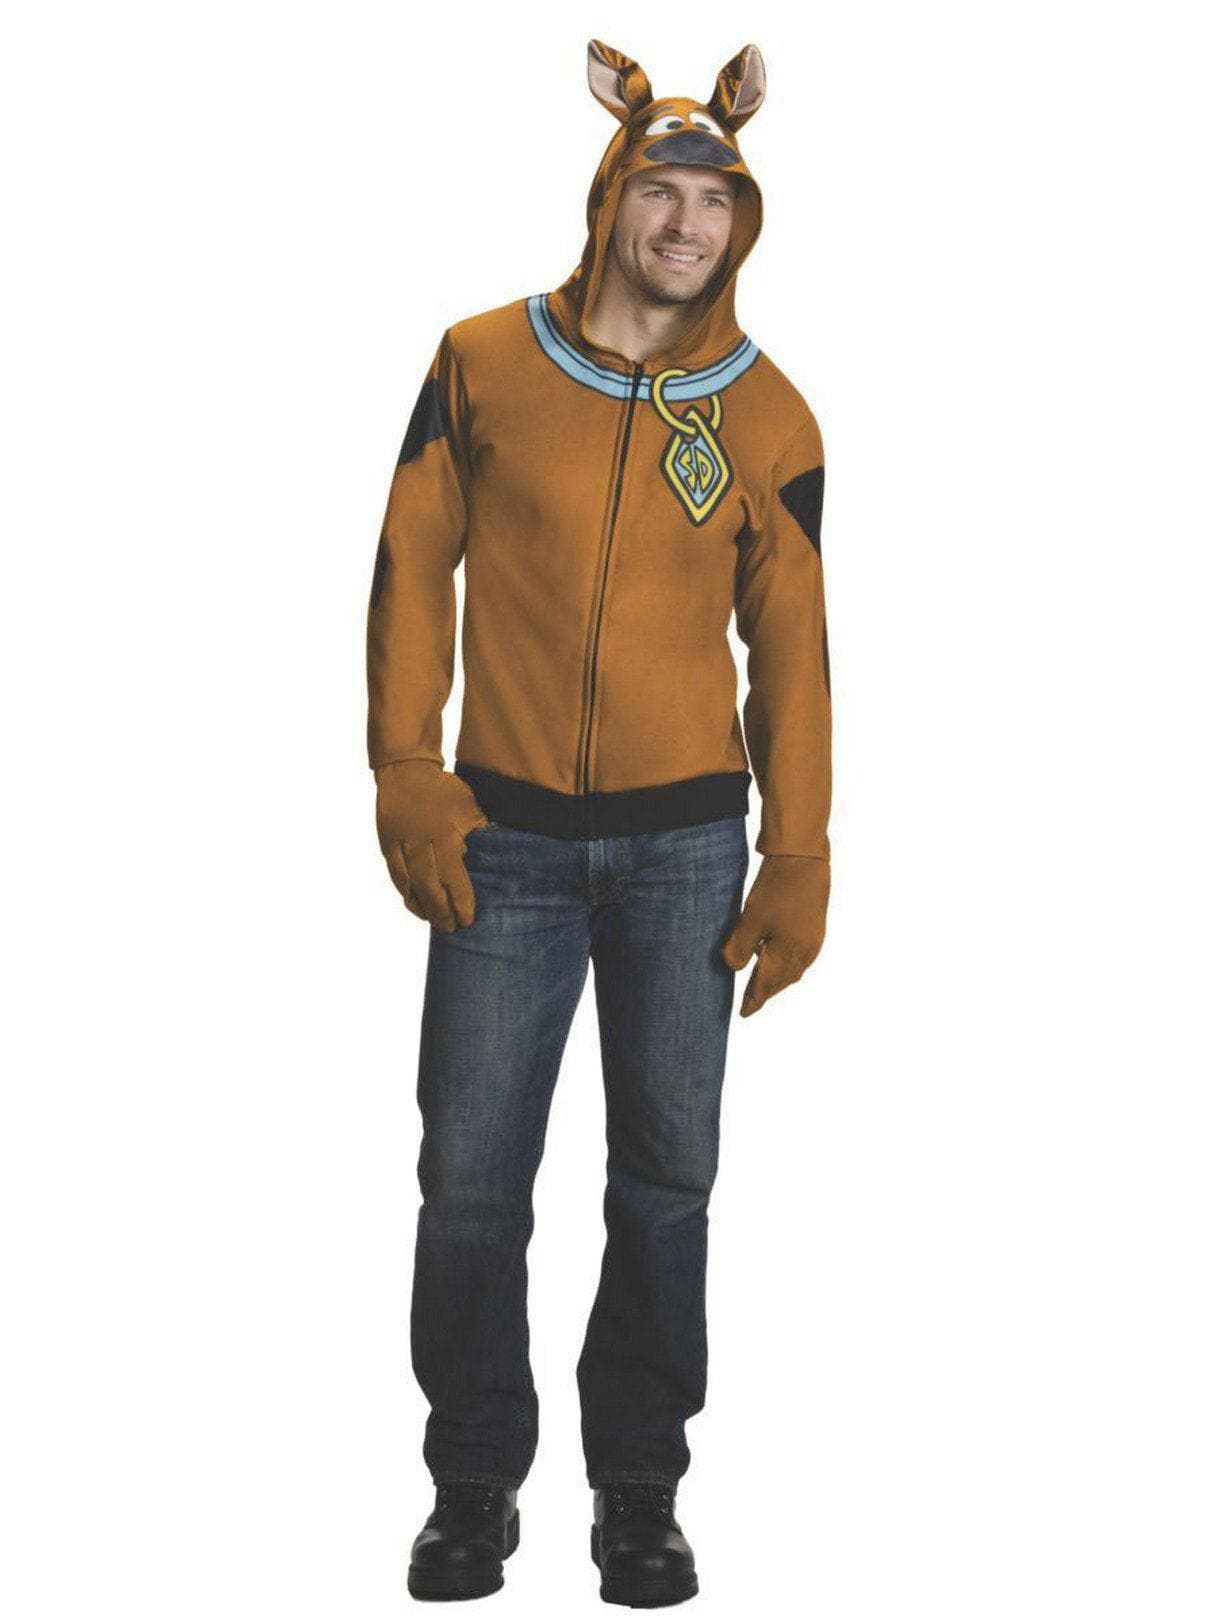 Men's Scooby-Doo Hooded Top with Gloves - costumes.com